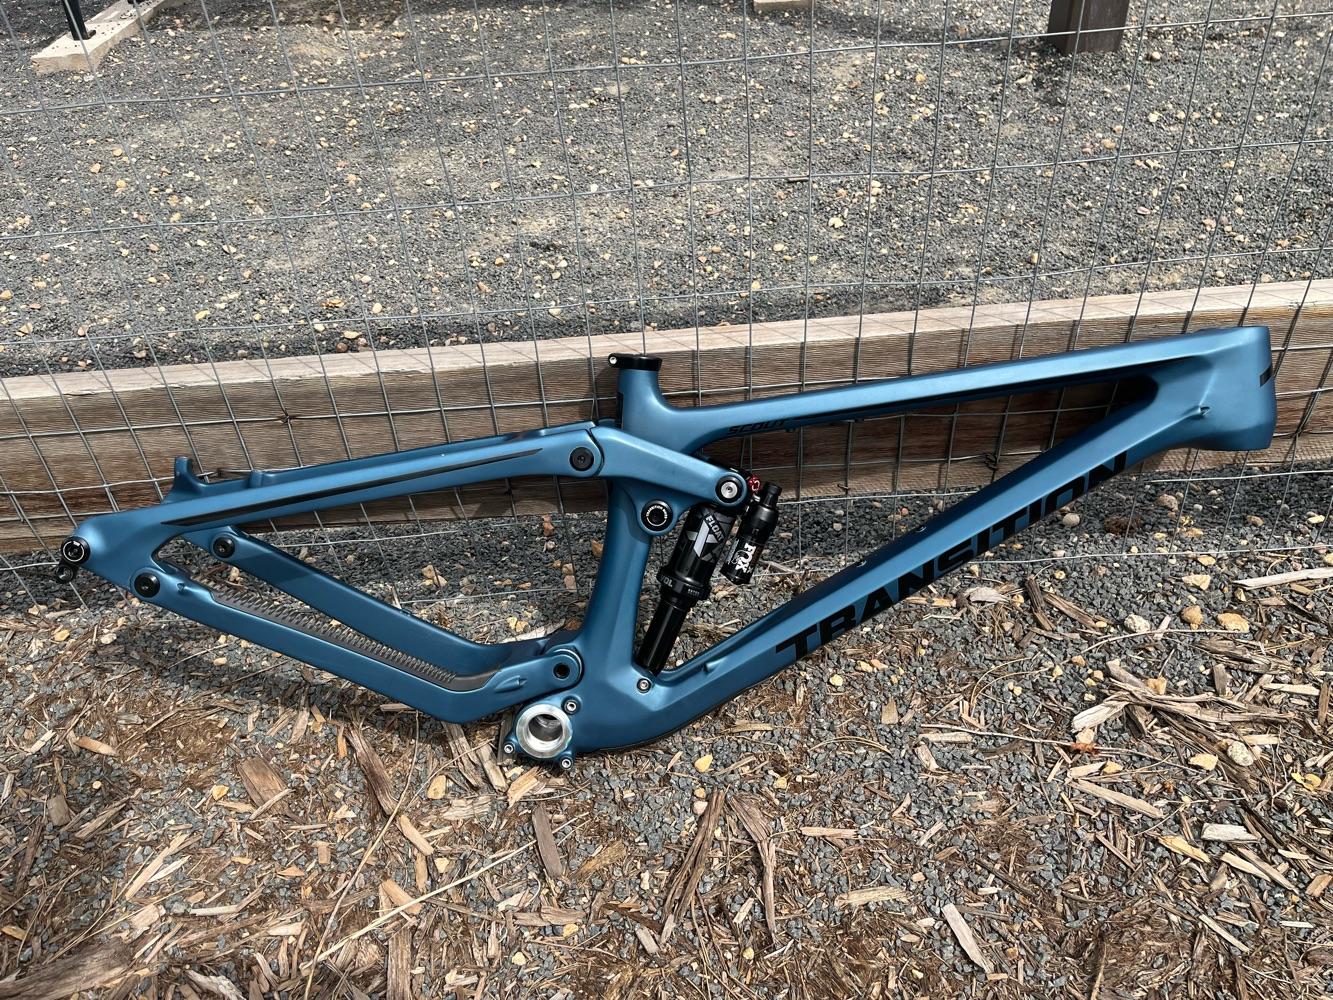 2020 Transition Scout Carbon, Small Mountain bike Frame, Midnight Blue